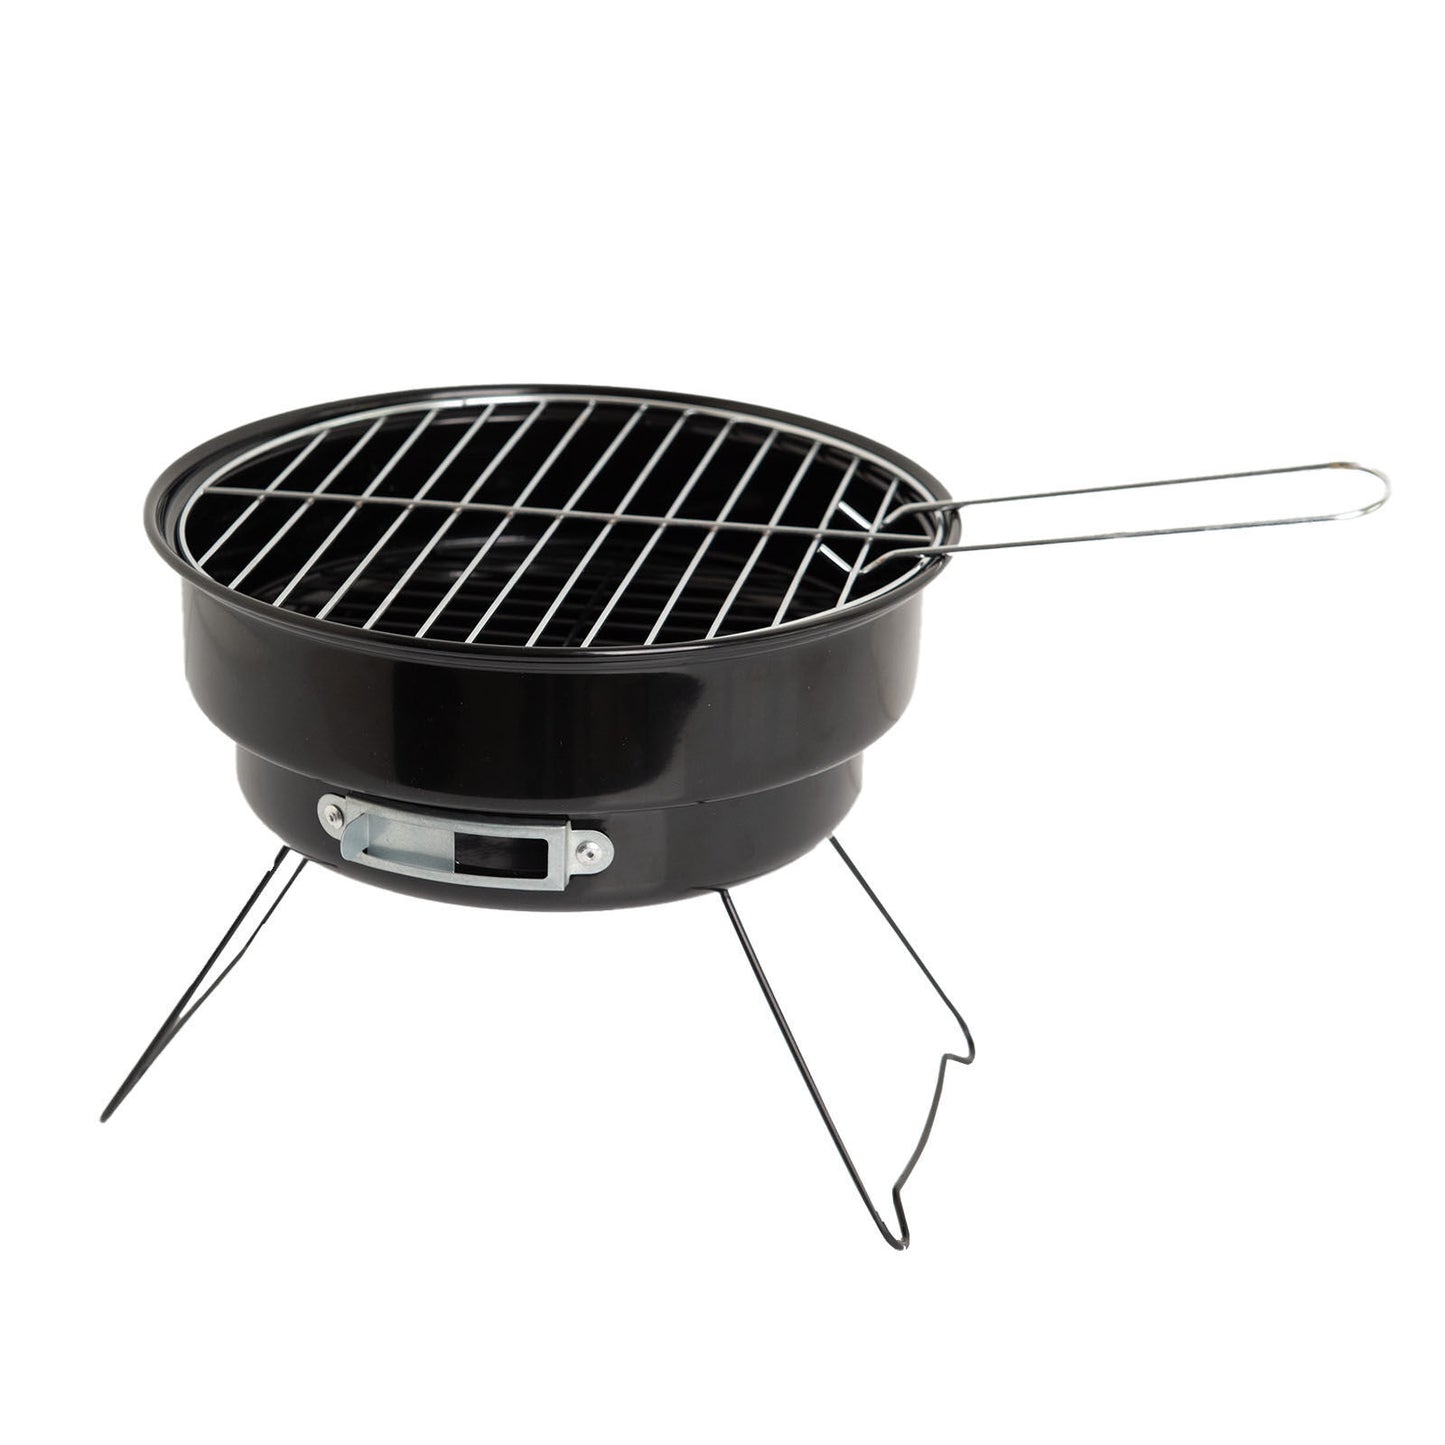 Ultimate Outdoor Entertainer's Delight: 2-in-1 BBQ Grill and Cooler Combo Set for Memorable Camping and Picnic Experiences